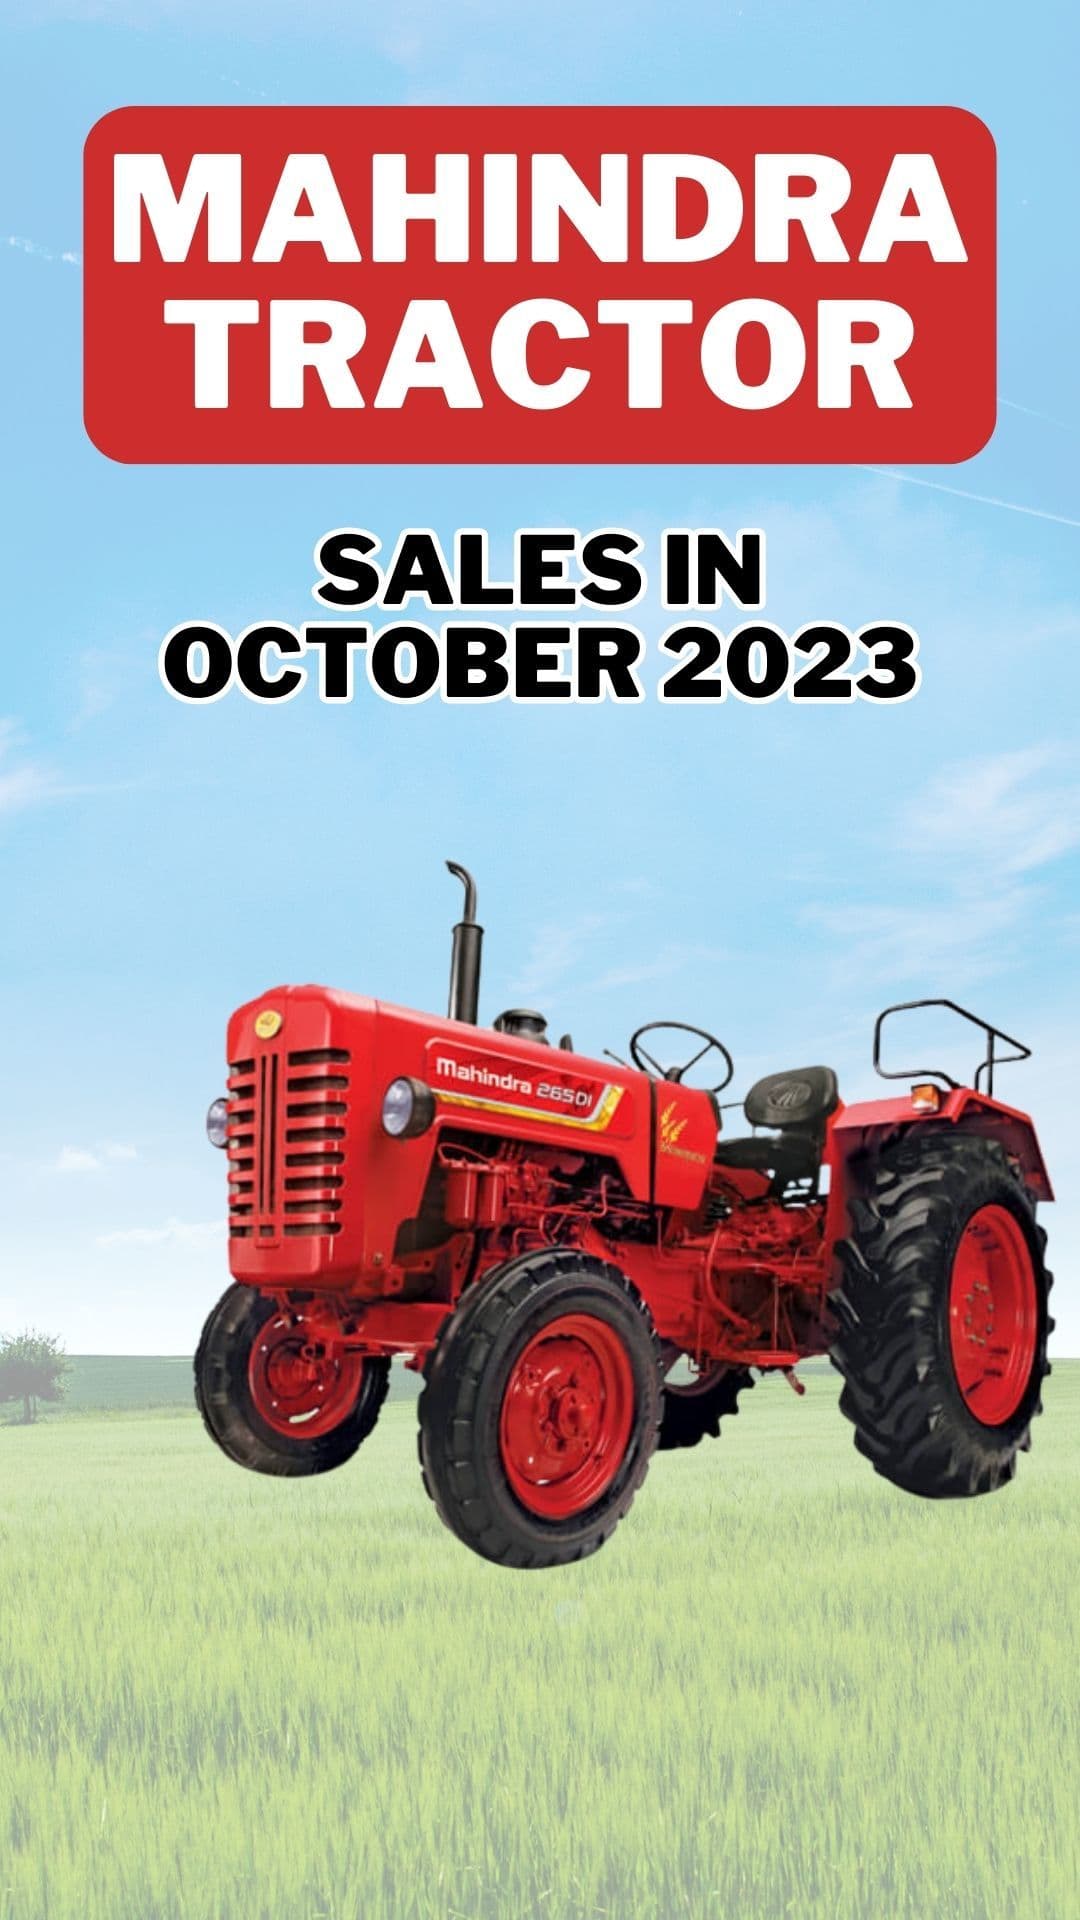 mahindra-tractor-sales-in-october